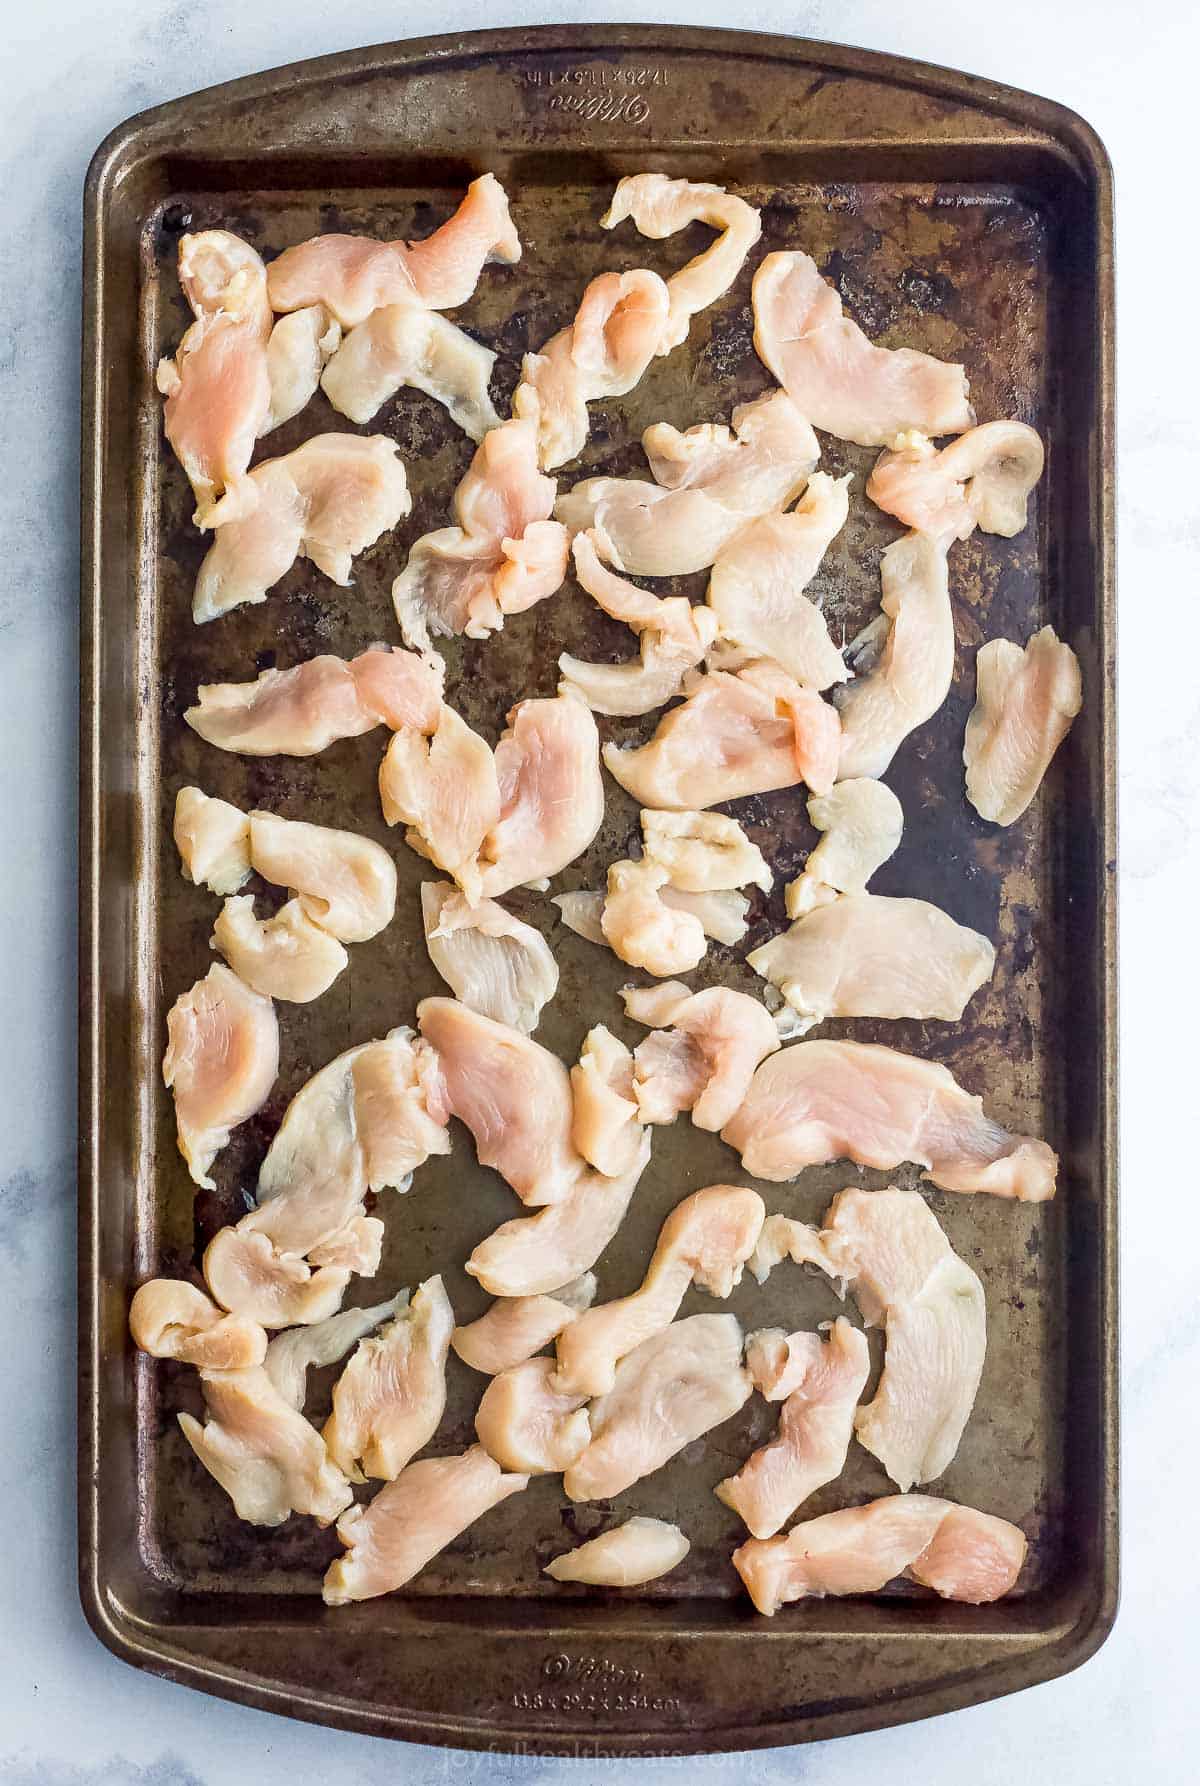 Slices of chicken breast on a baking sheet